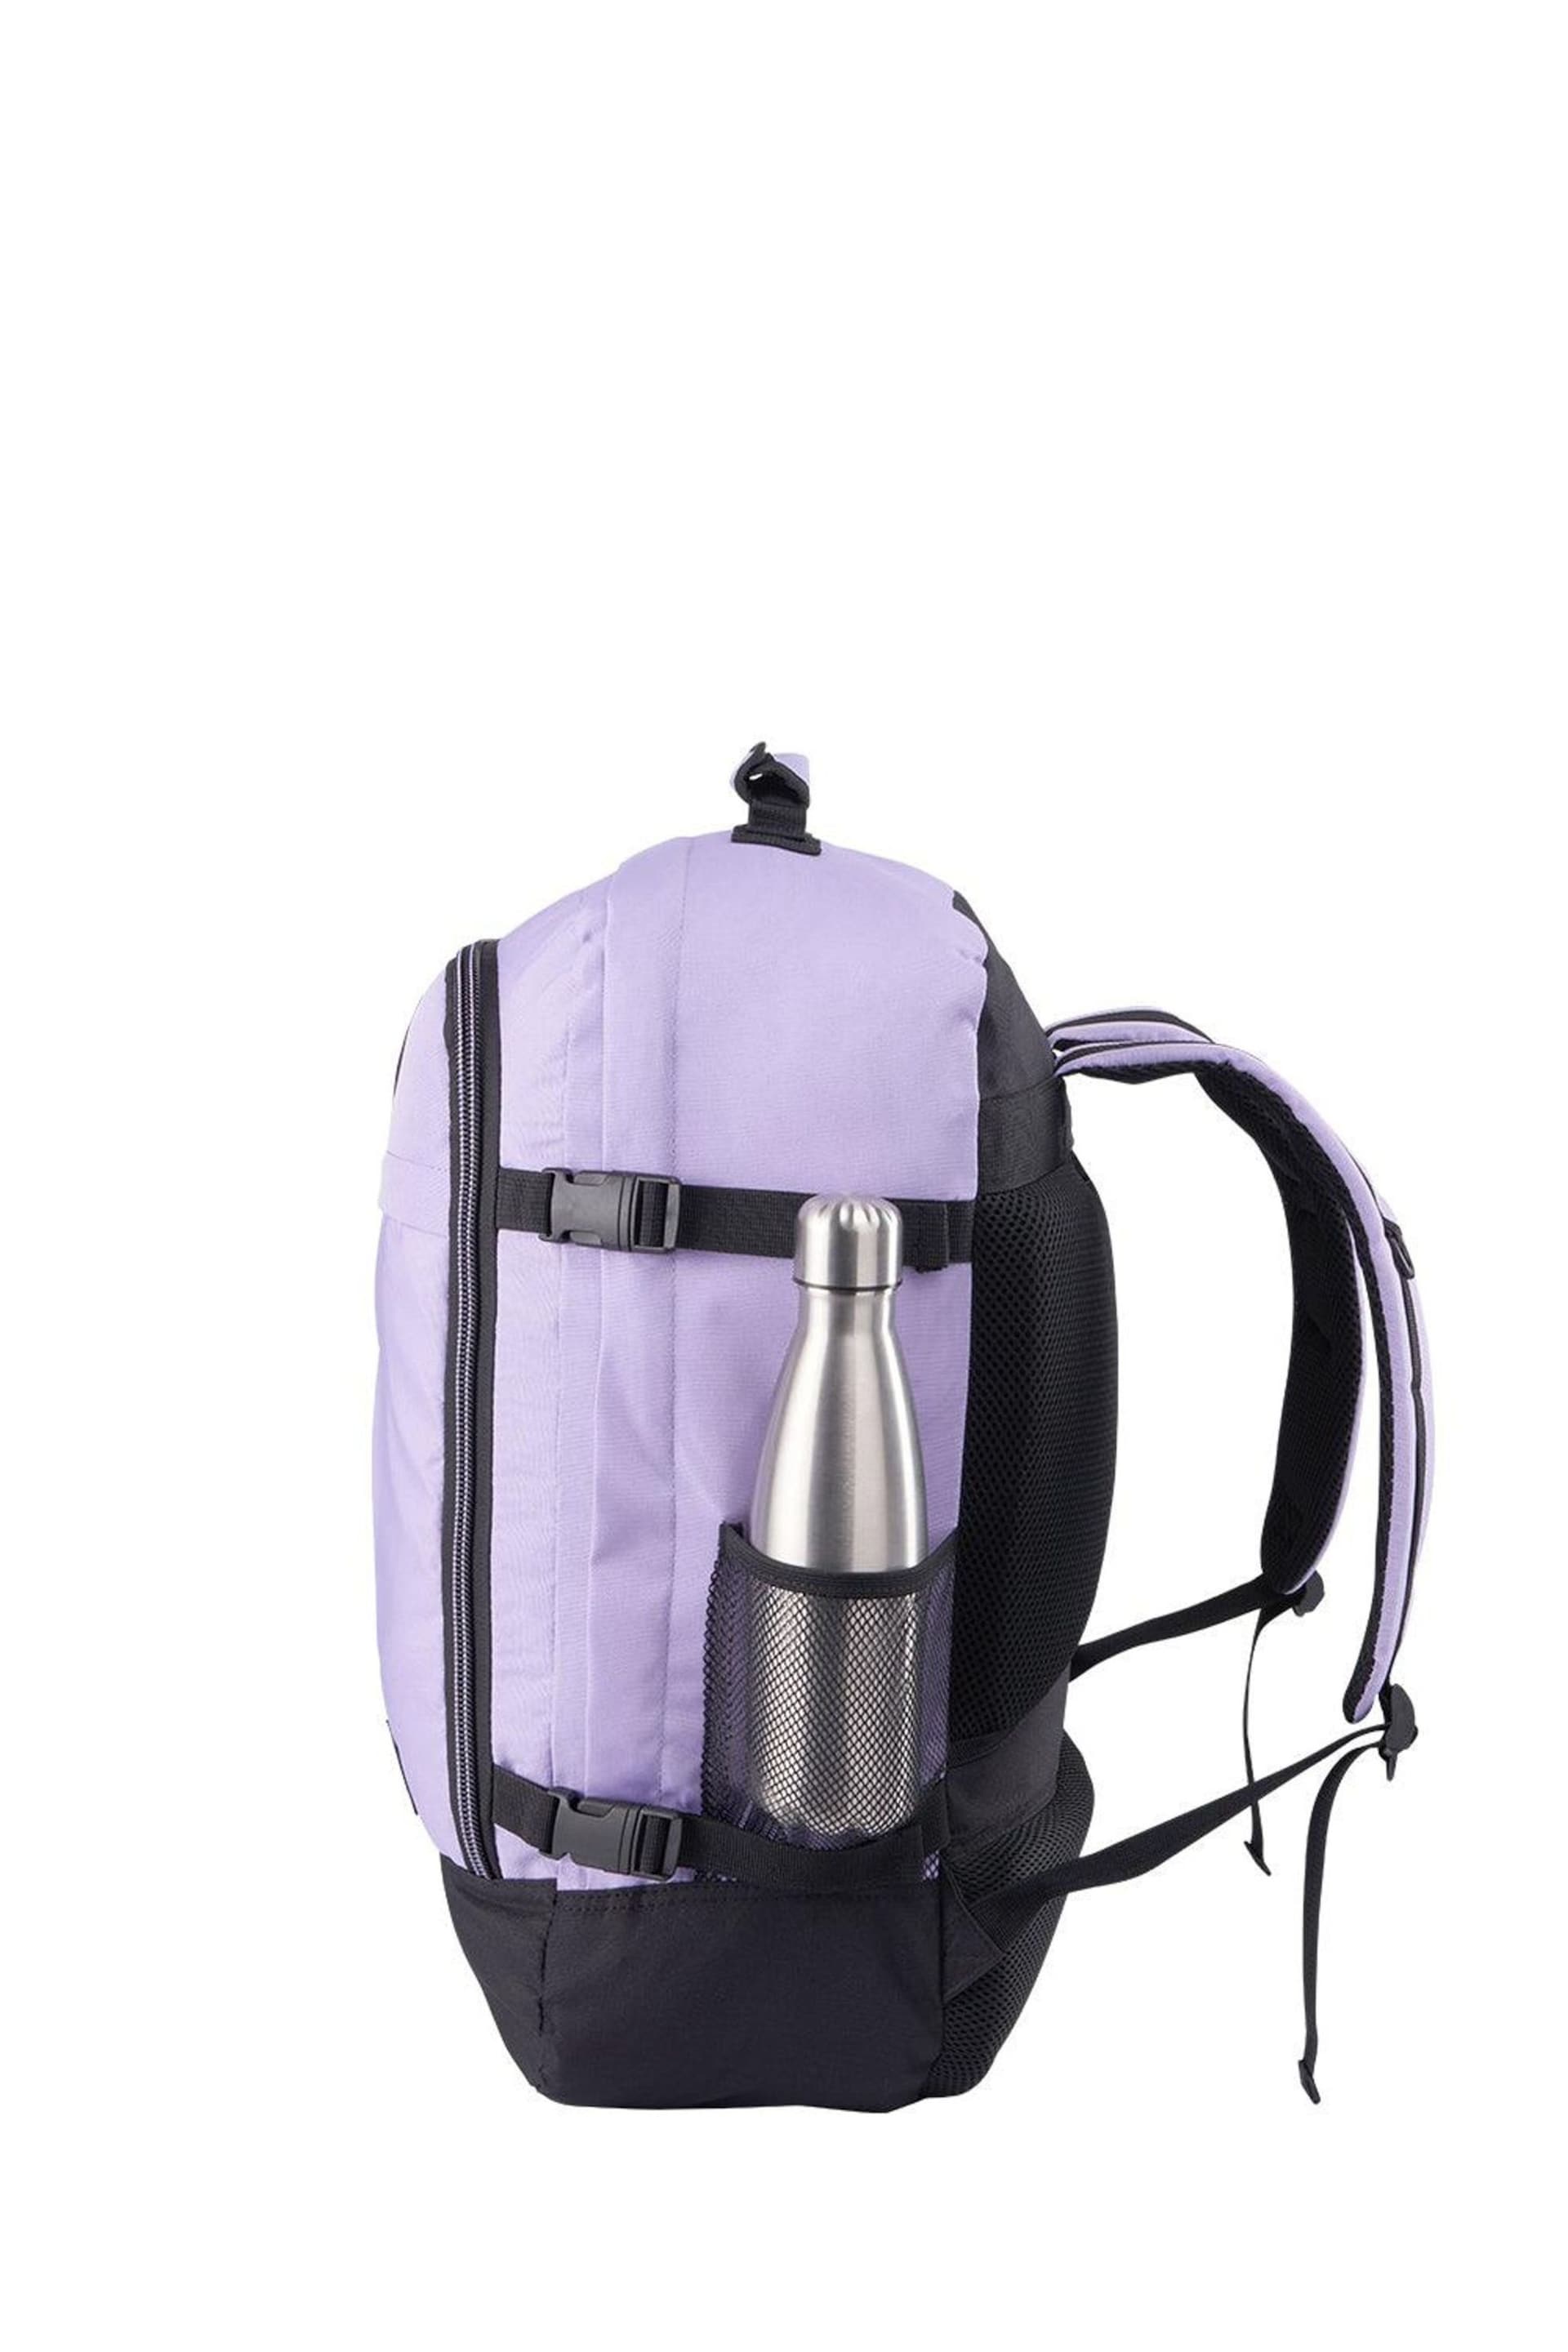 Cabin Max Metz 44L Carry On 55cm Backpack - Image 3 of 4